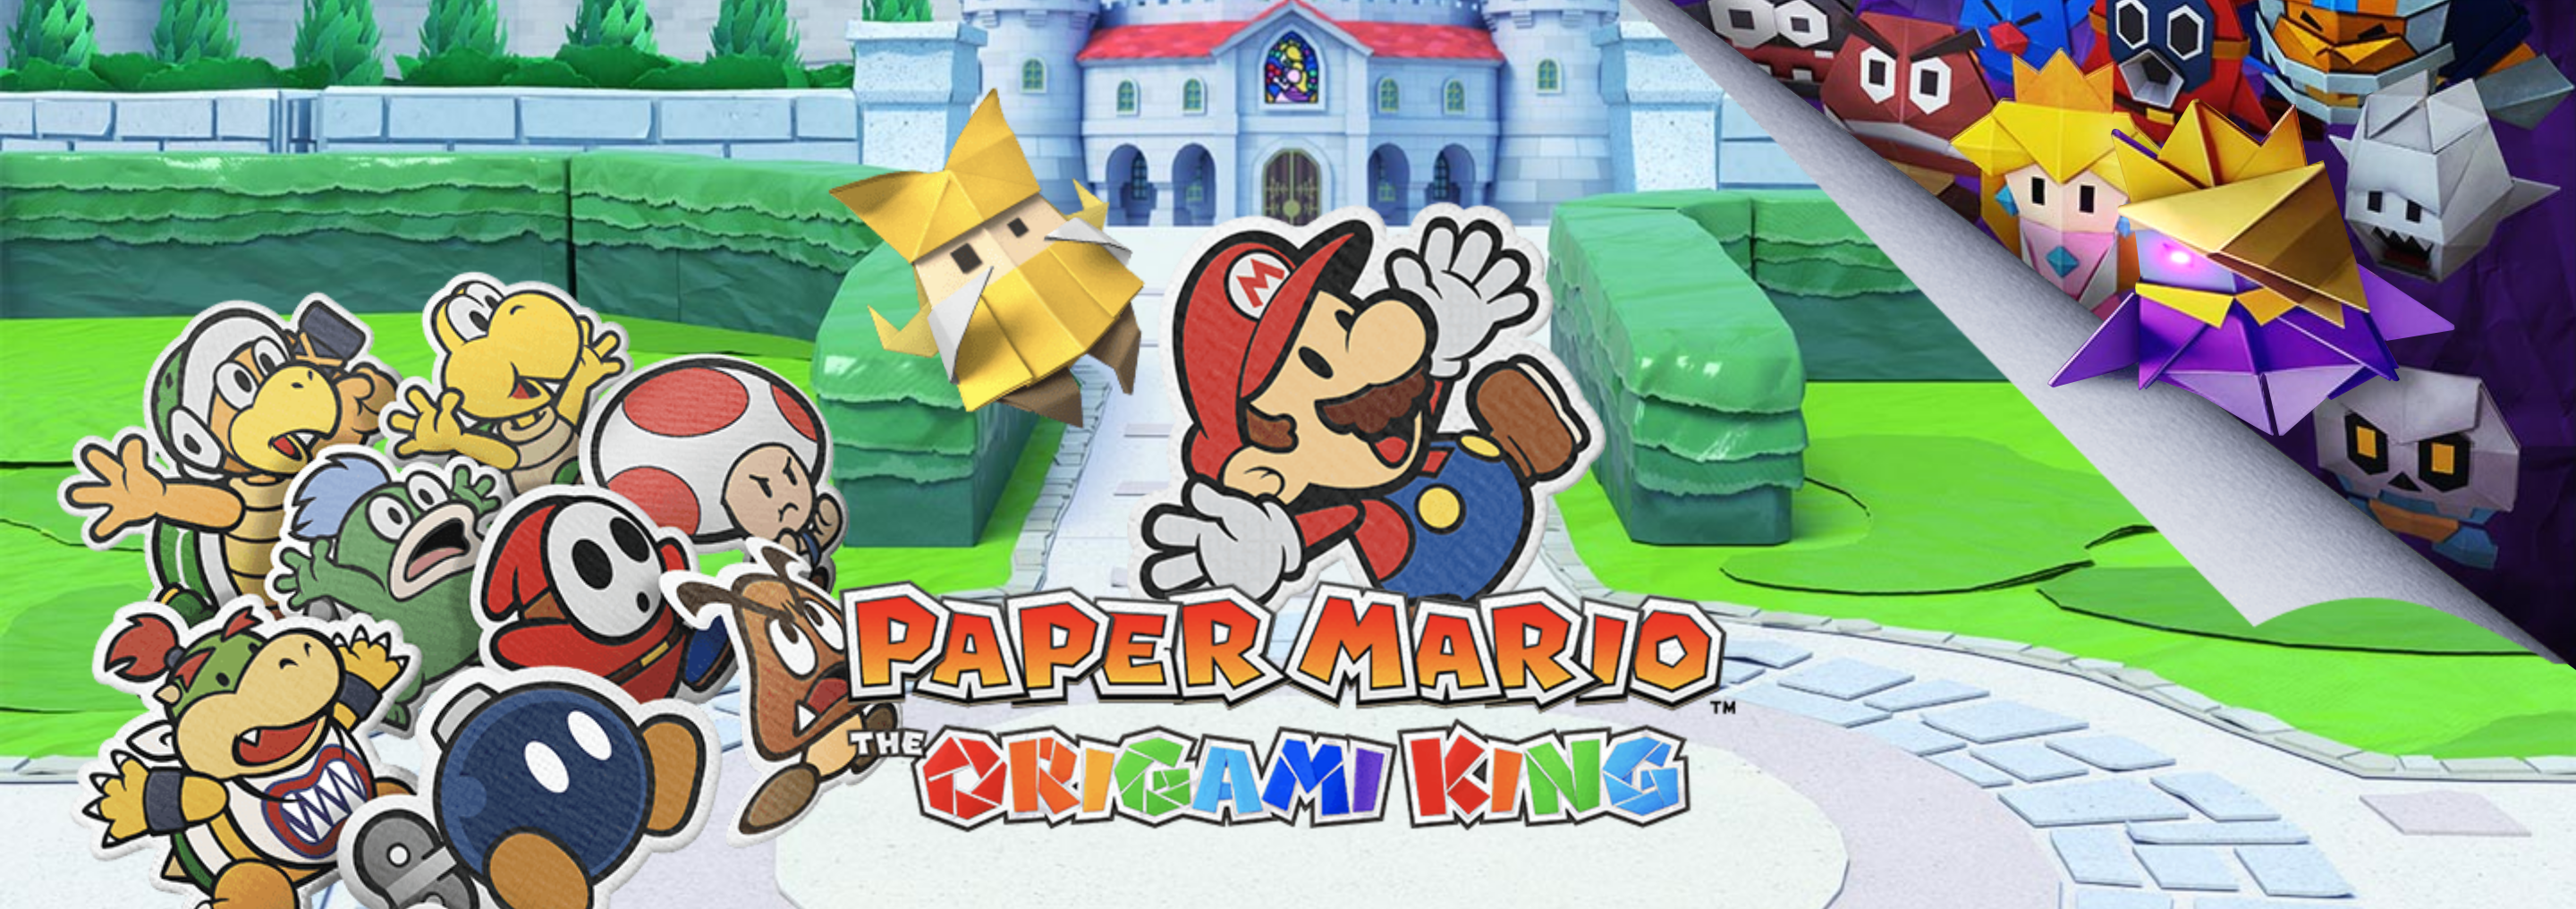 Paper Mario Origami King Banner